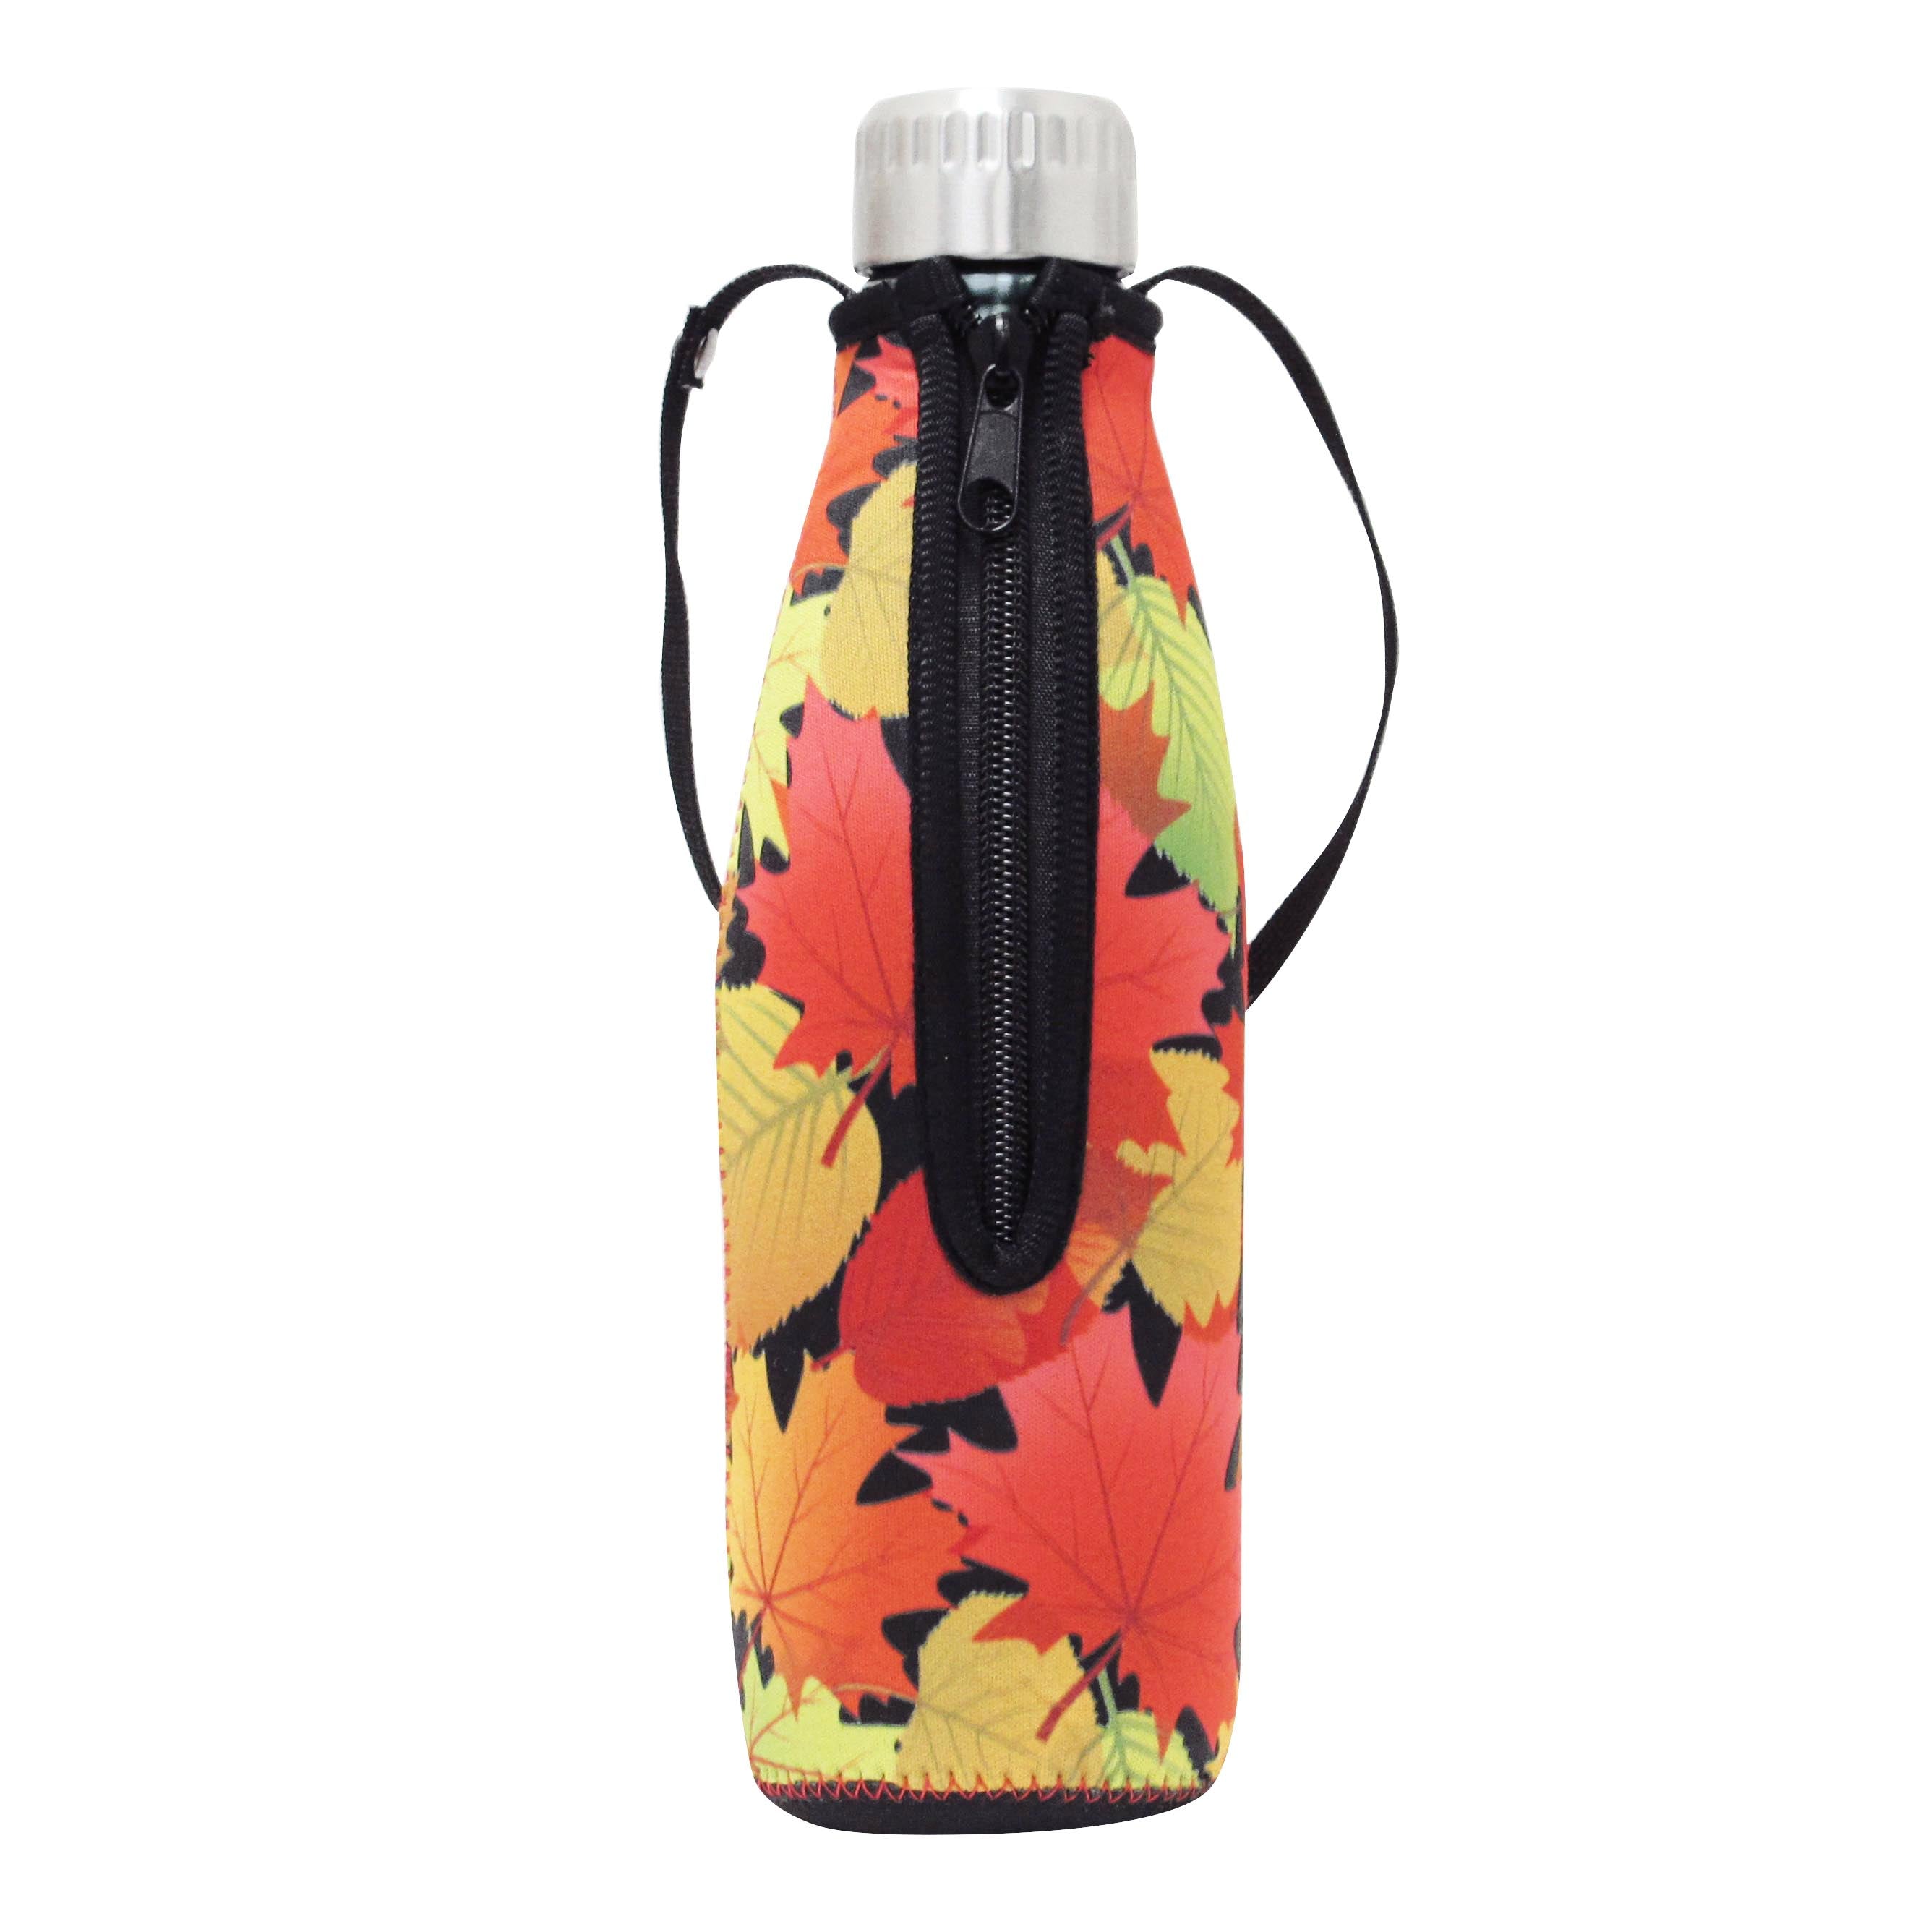 Fall Leaves Water Bottle and Sleeve